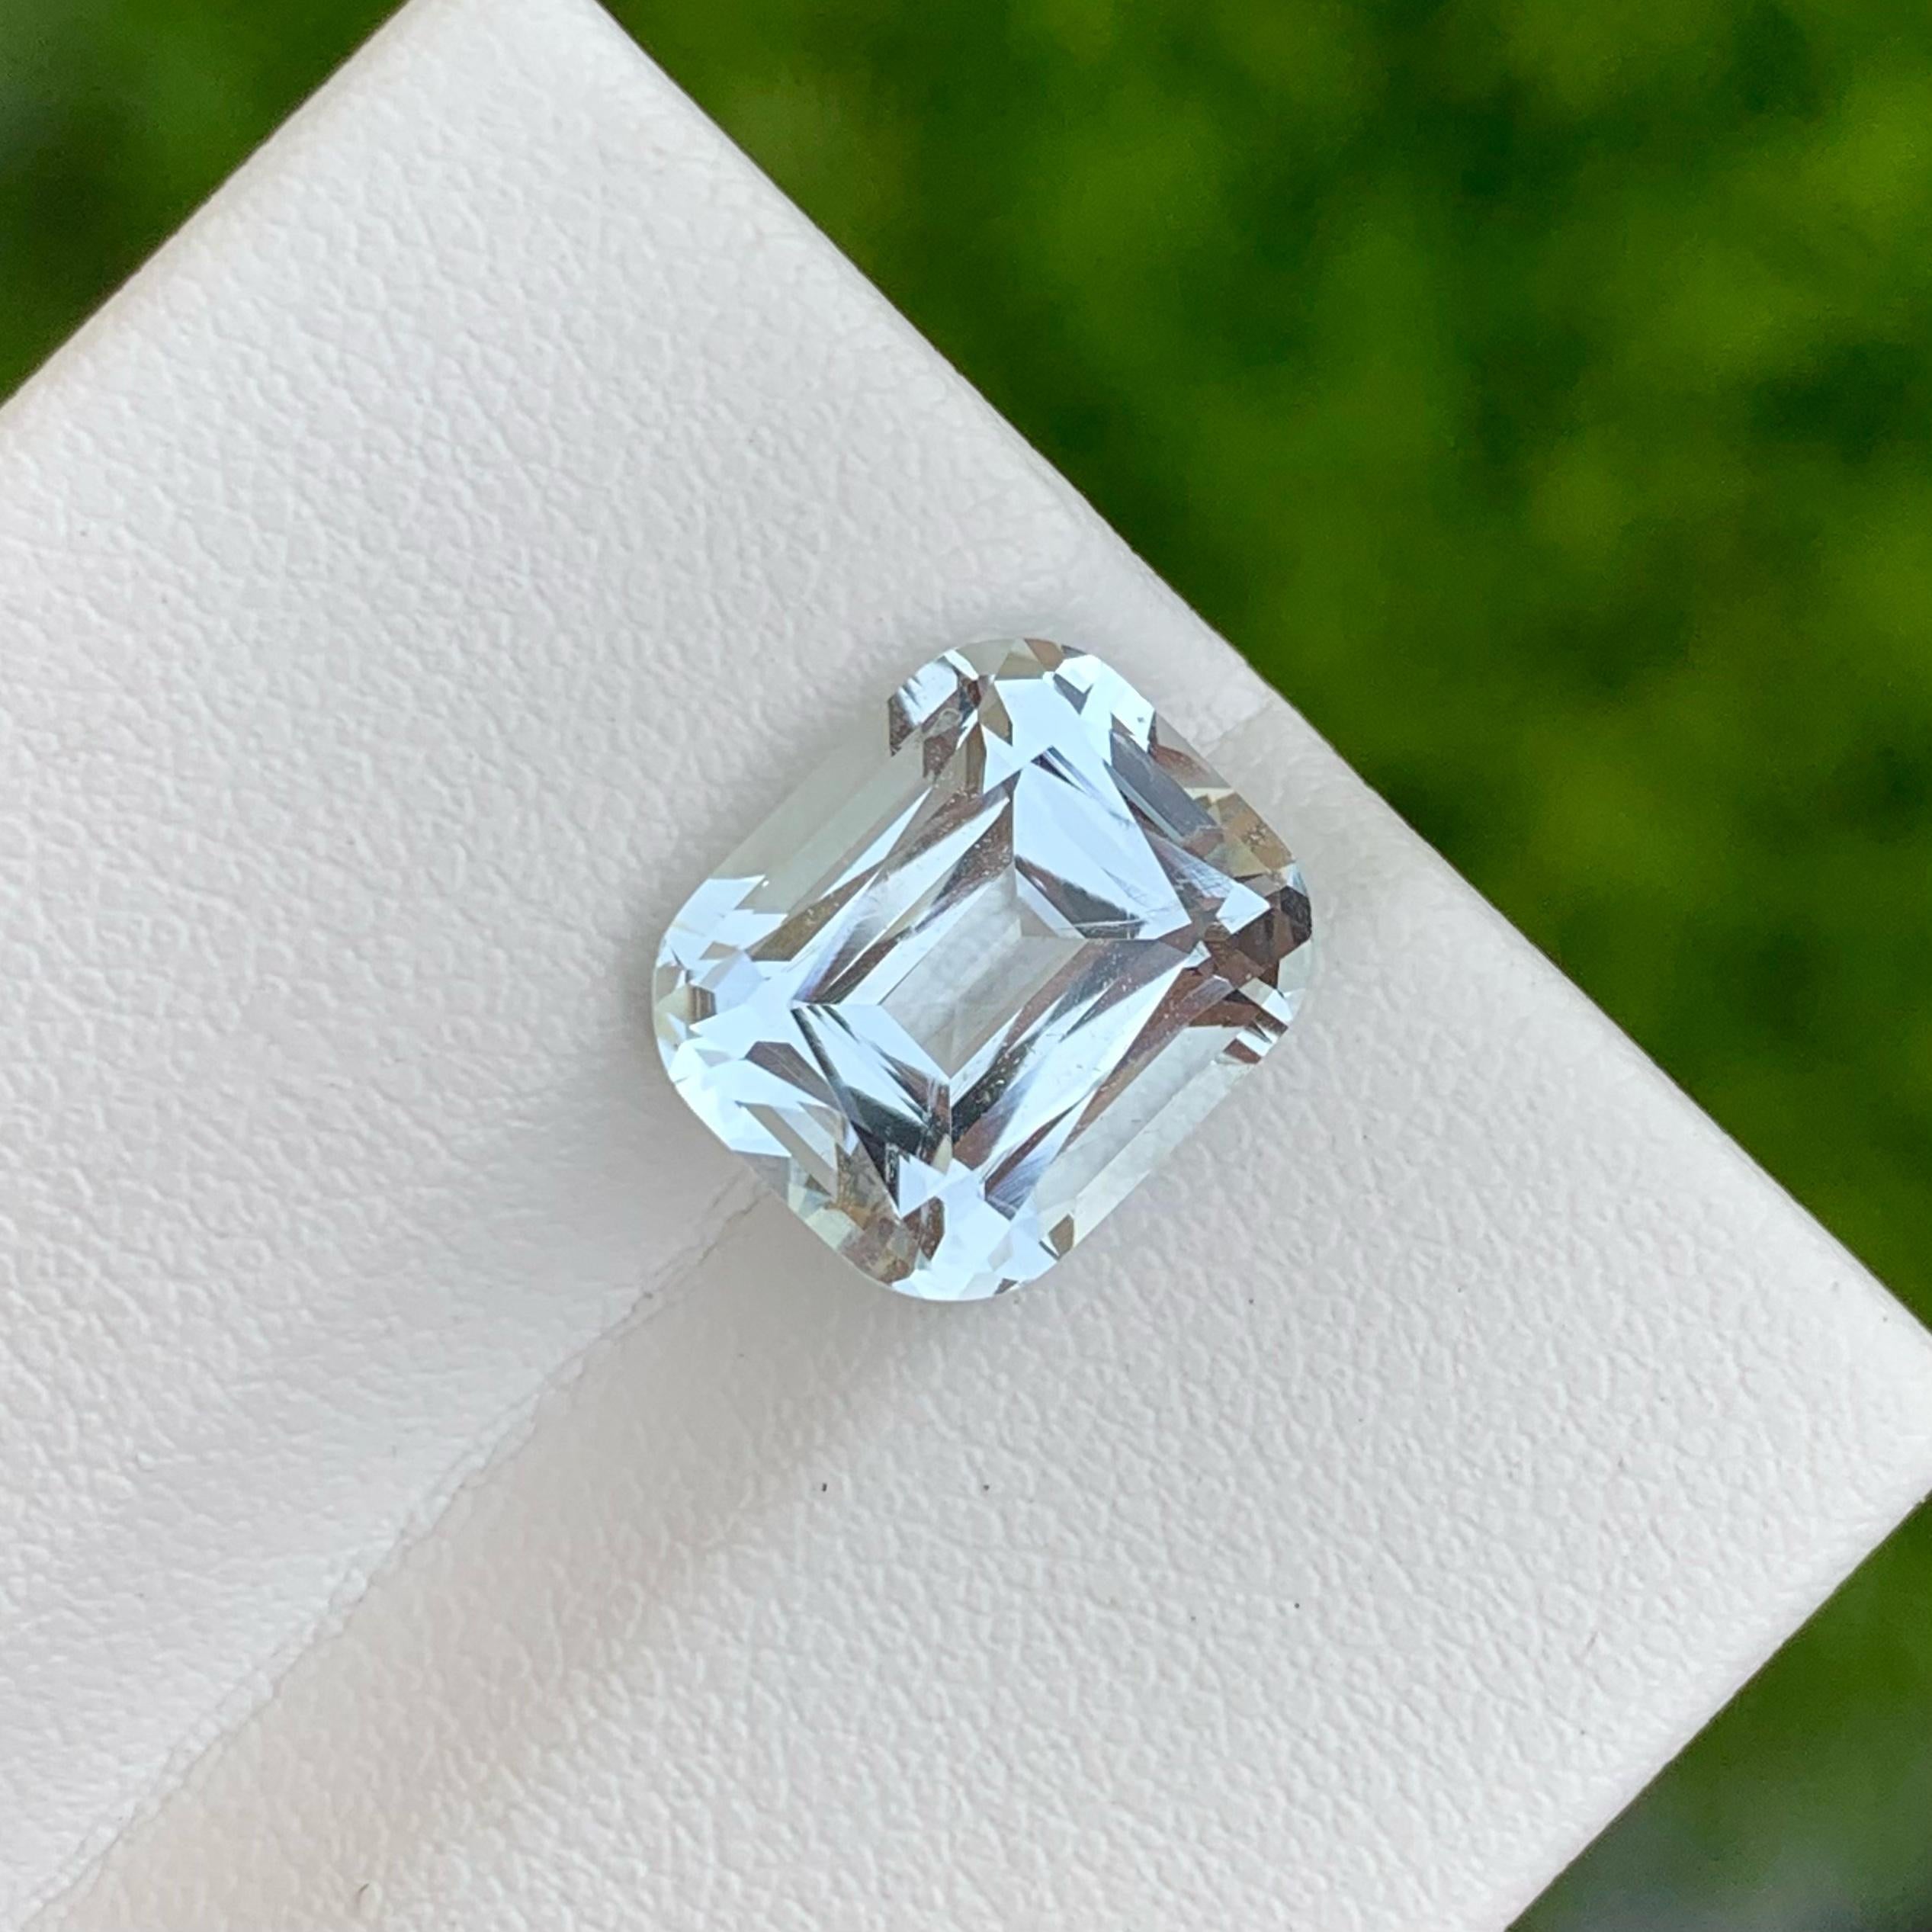 Weight 5.35 carats 
Dimensions 11.7x10.0x7.2 mm
Treatment none 
Origin Pakistan 
Clarity loupe clean 
Shape cushion
Cut fancy cushion

Our aquamarine gemstone boasts a mesmerizing pale blue color reminiscent of crystal-clear waters, evoking a sense